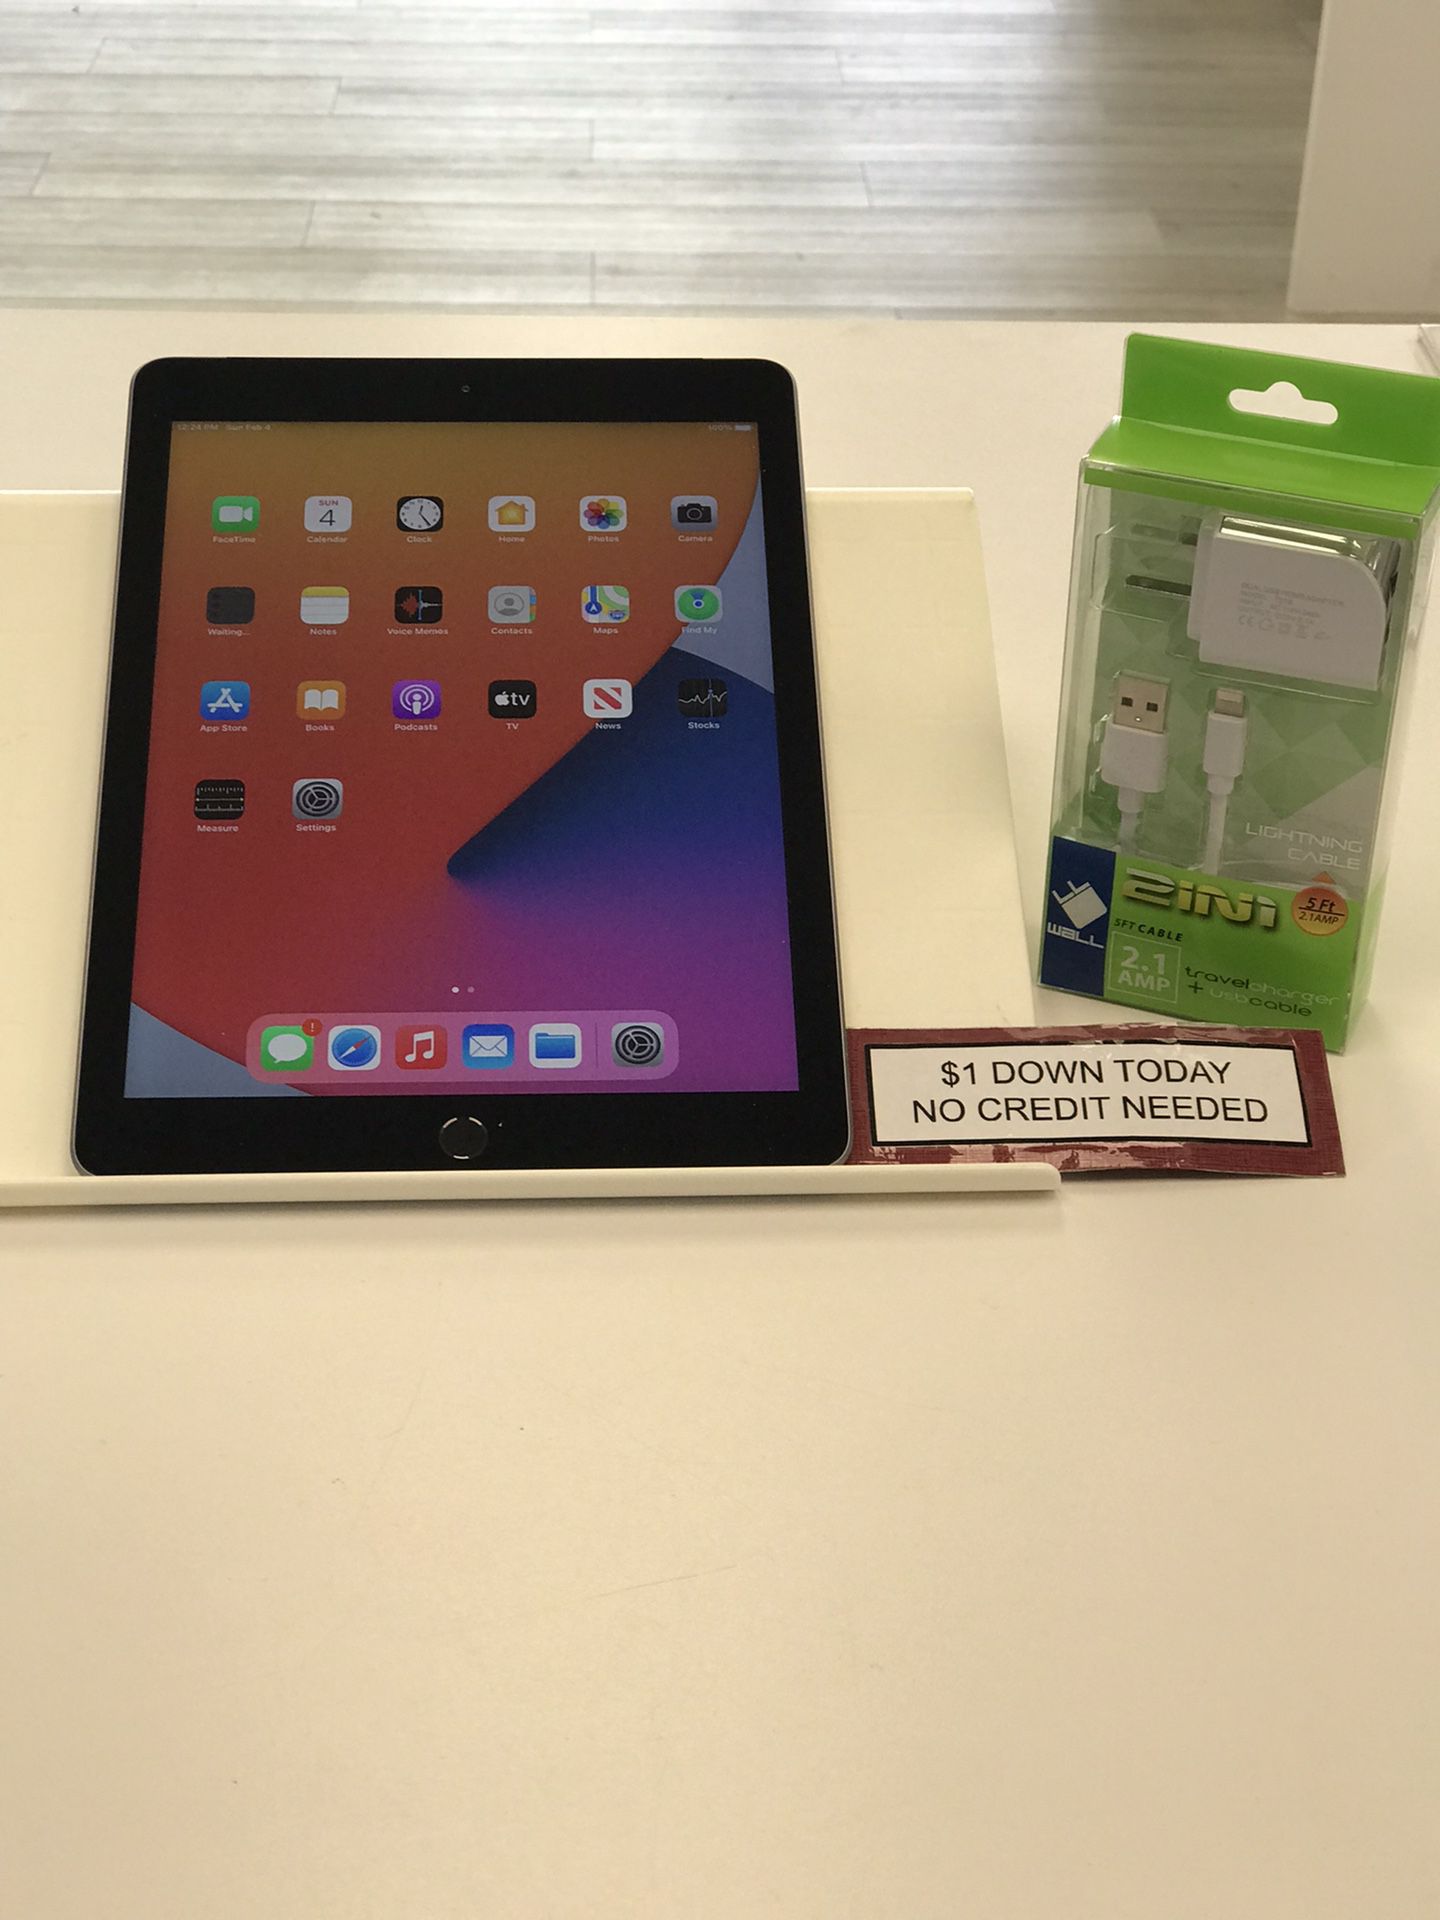 Apple iPad 6th Generation - Pay $1 Today to Take it Home and Pay the Rest Later!